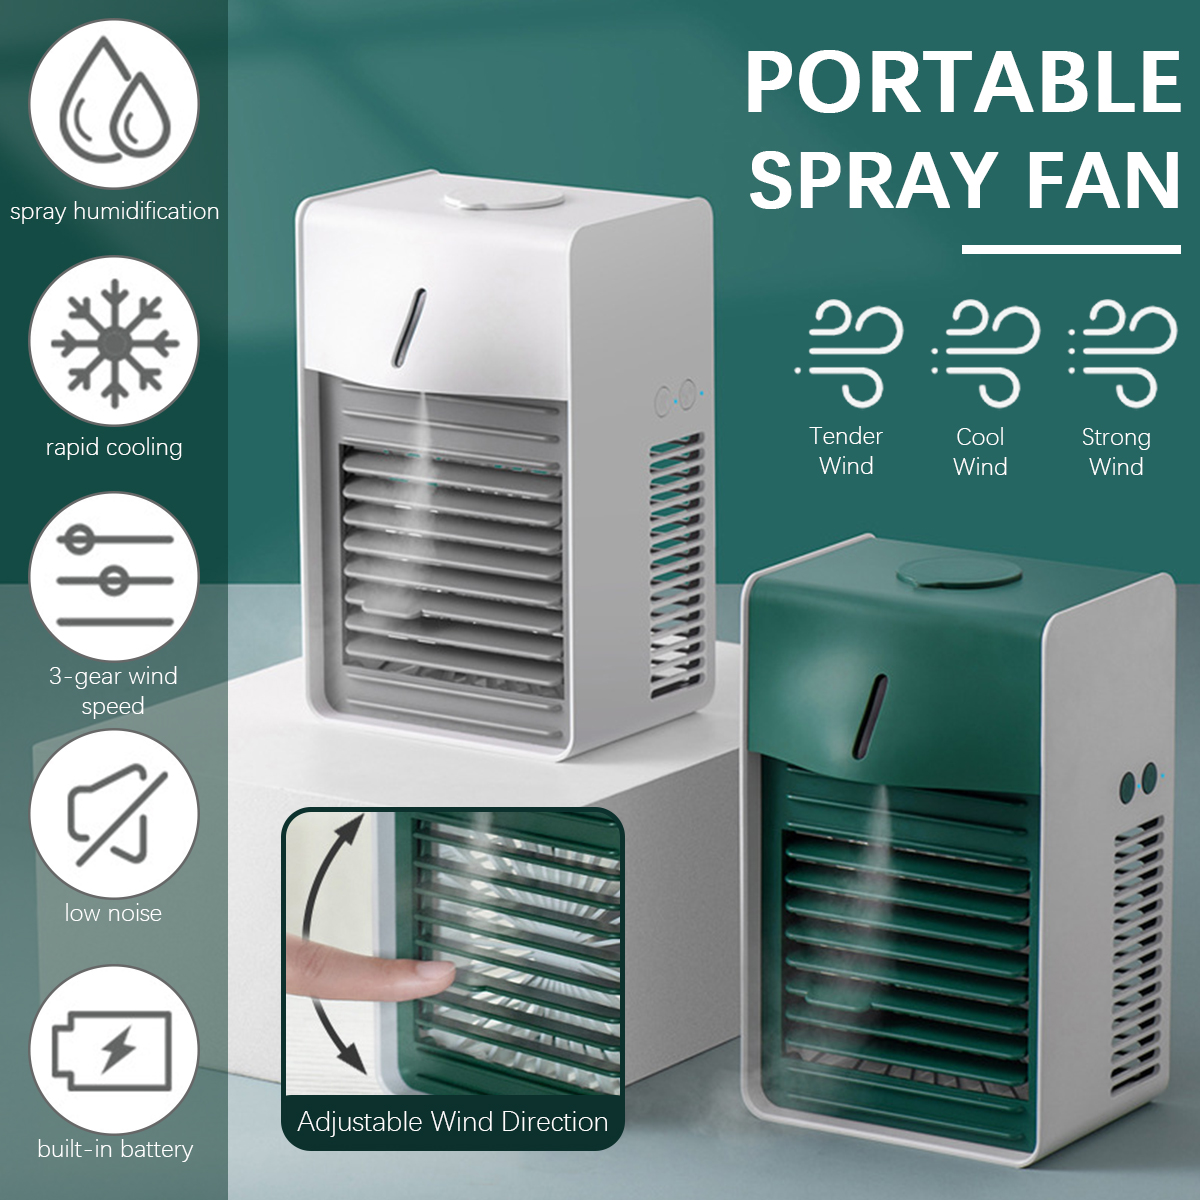 Bakeey-Personal-Portable-Cooler-AC-Air-Conditioner-USB-Charging-Air-Fan-Humidifier-1849216-1